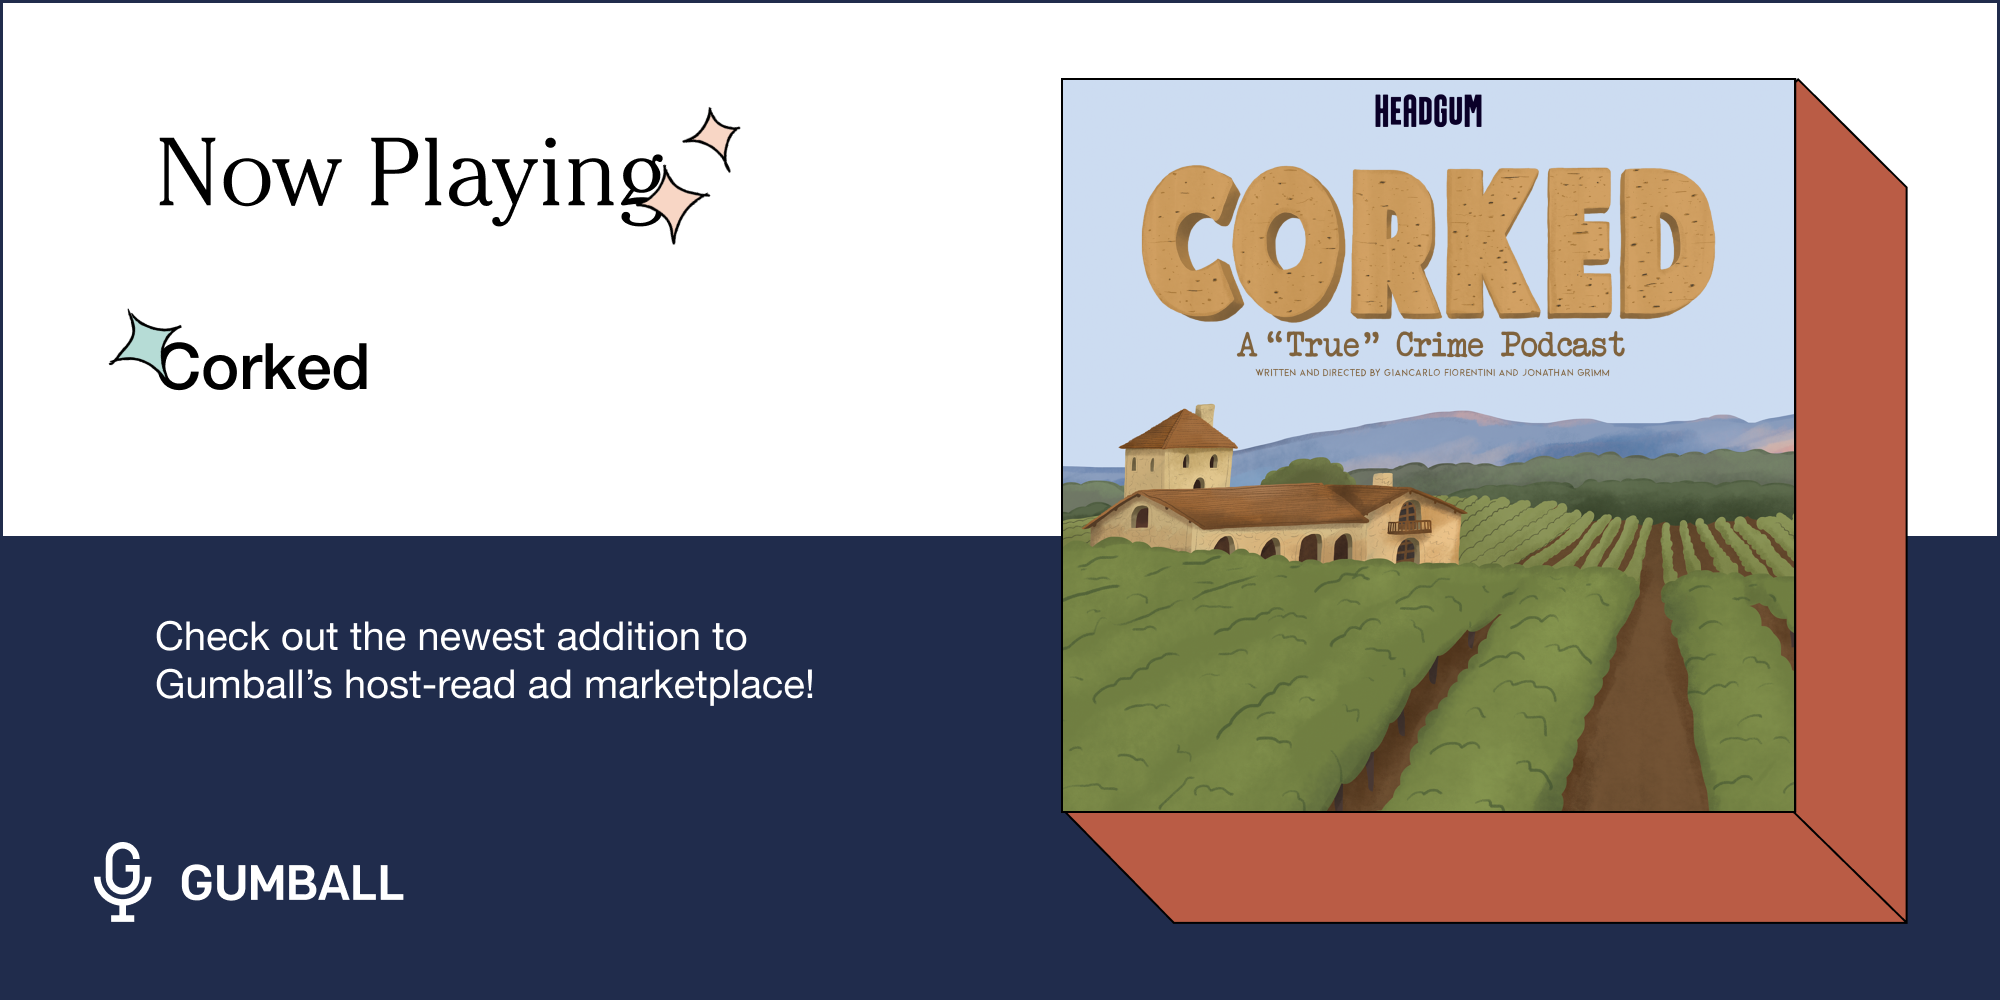 cover art for new podcast corked featuring vineyard landscape and the word corked above it